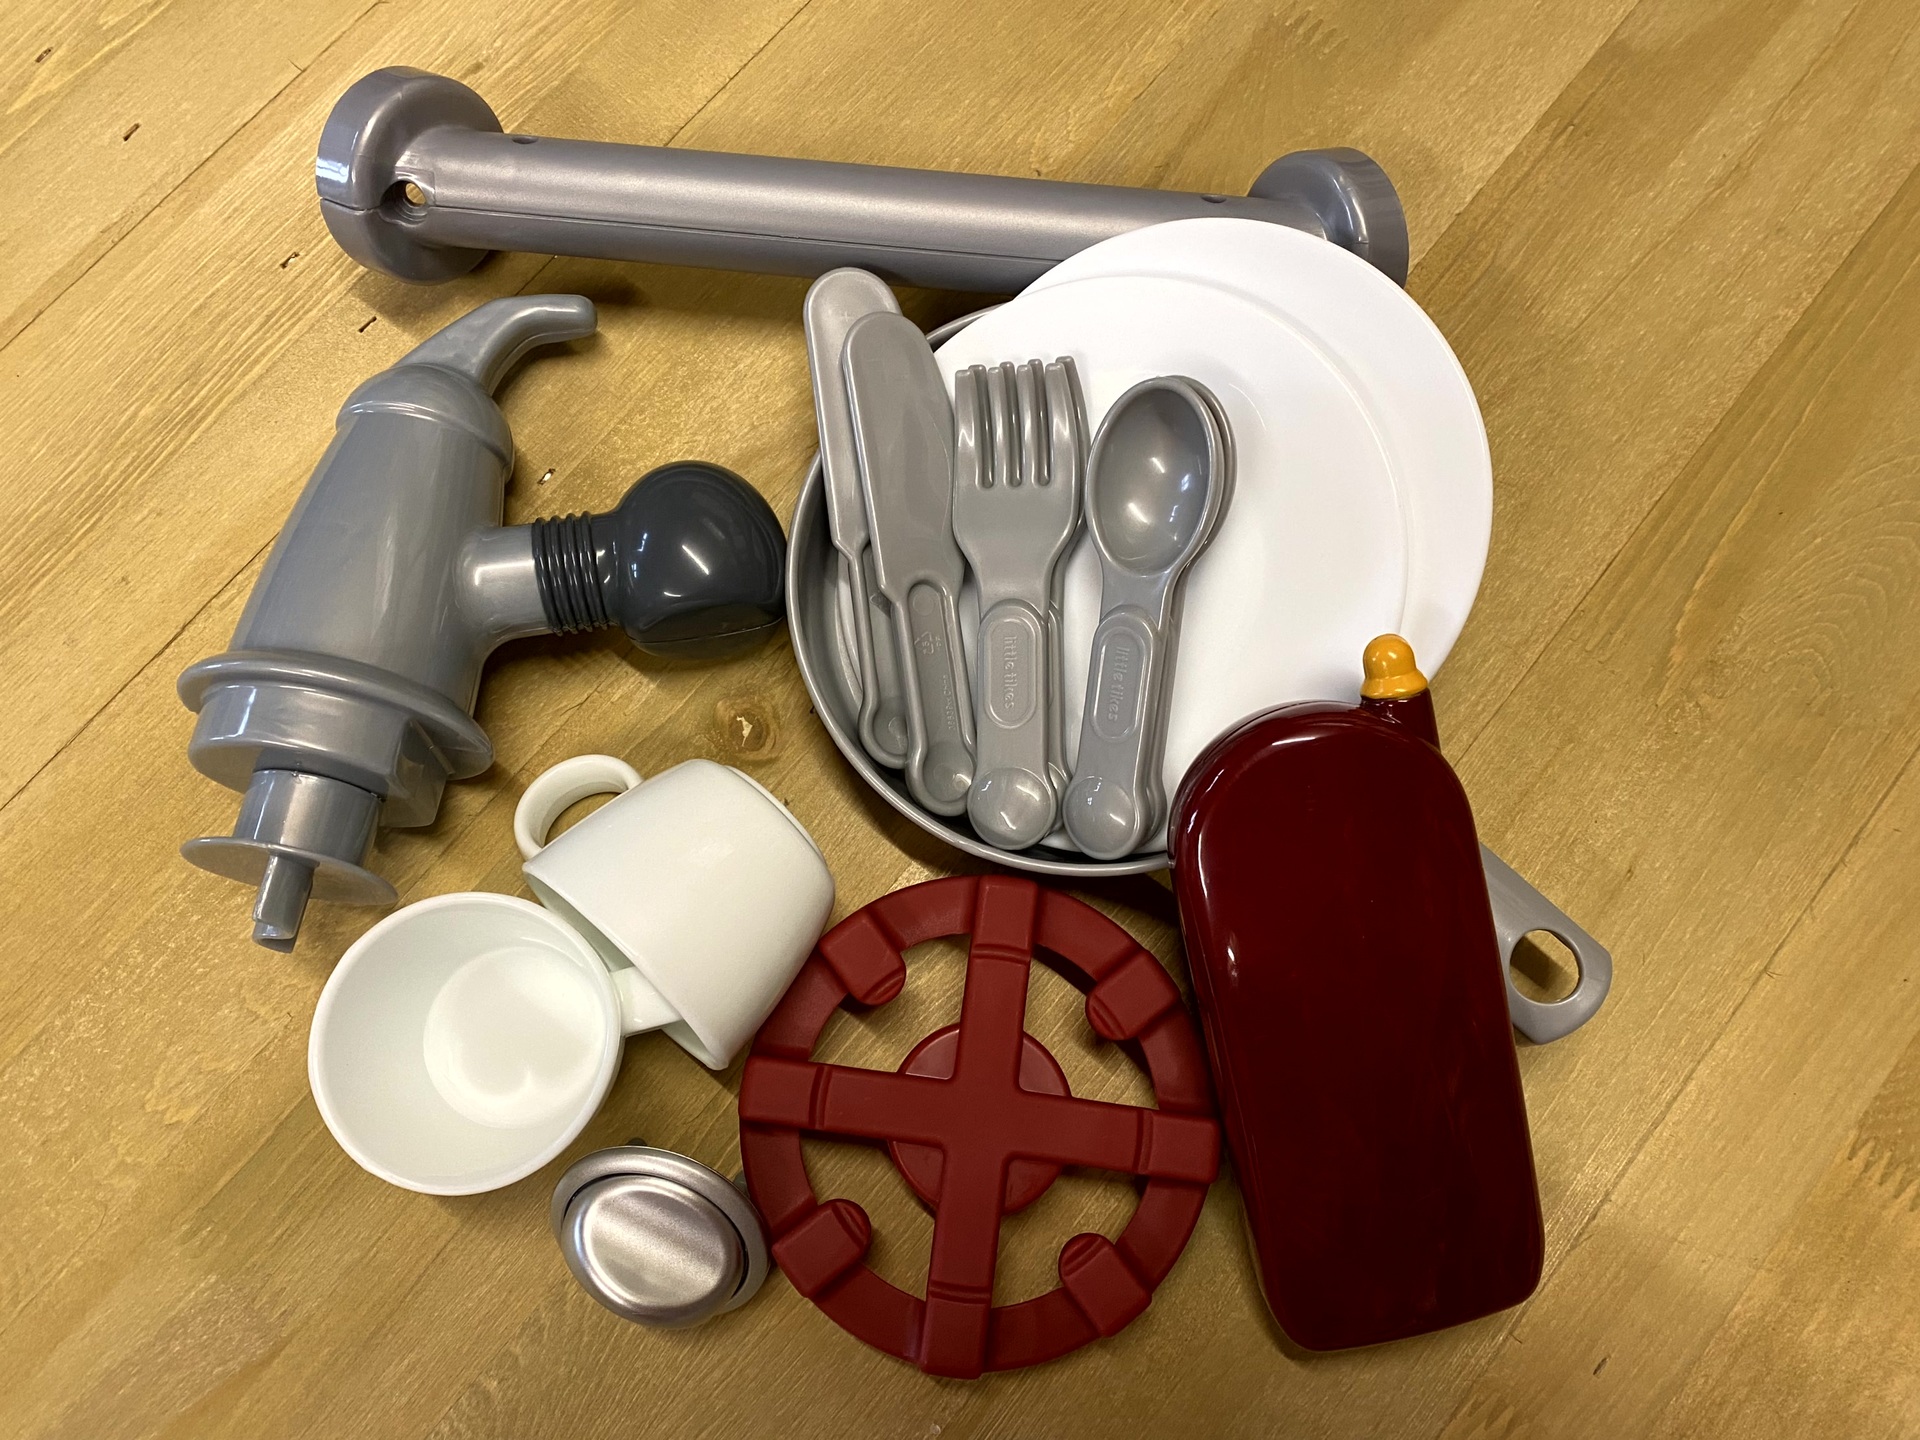 Accessory Pack - phone, towel rail, 2 cups, tap, 2 x knife, fork, spoon, frying pan, 2 plates, cooker knobs, hob ring. Image